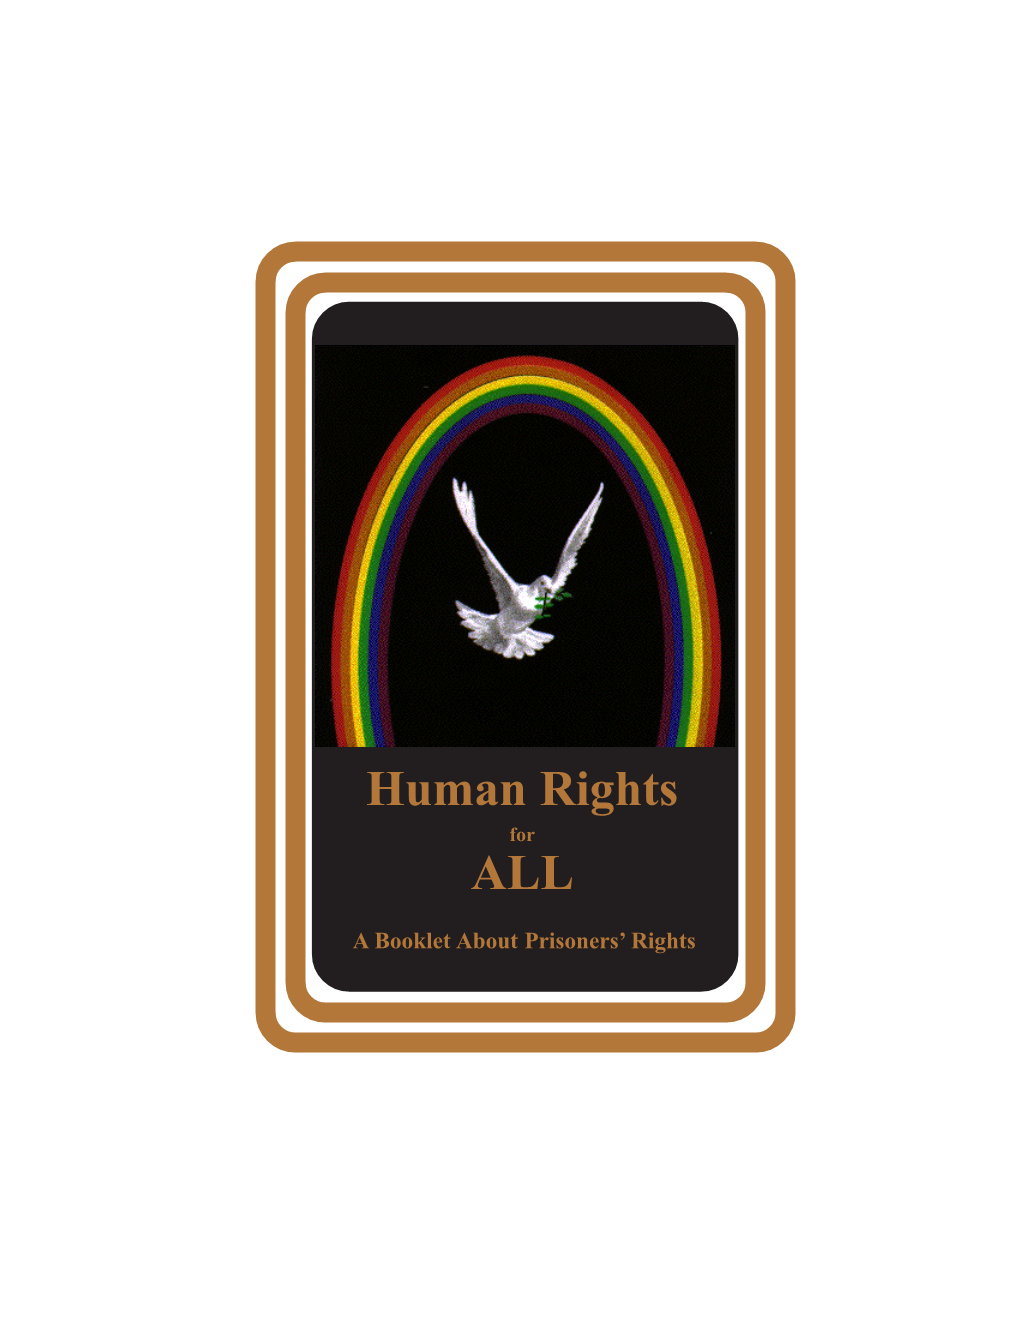 Human Rights for ALL